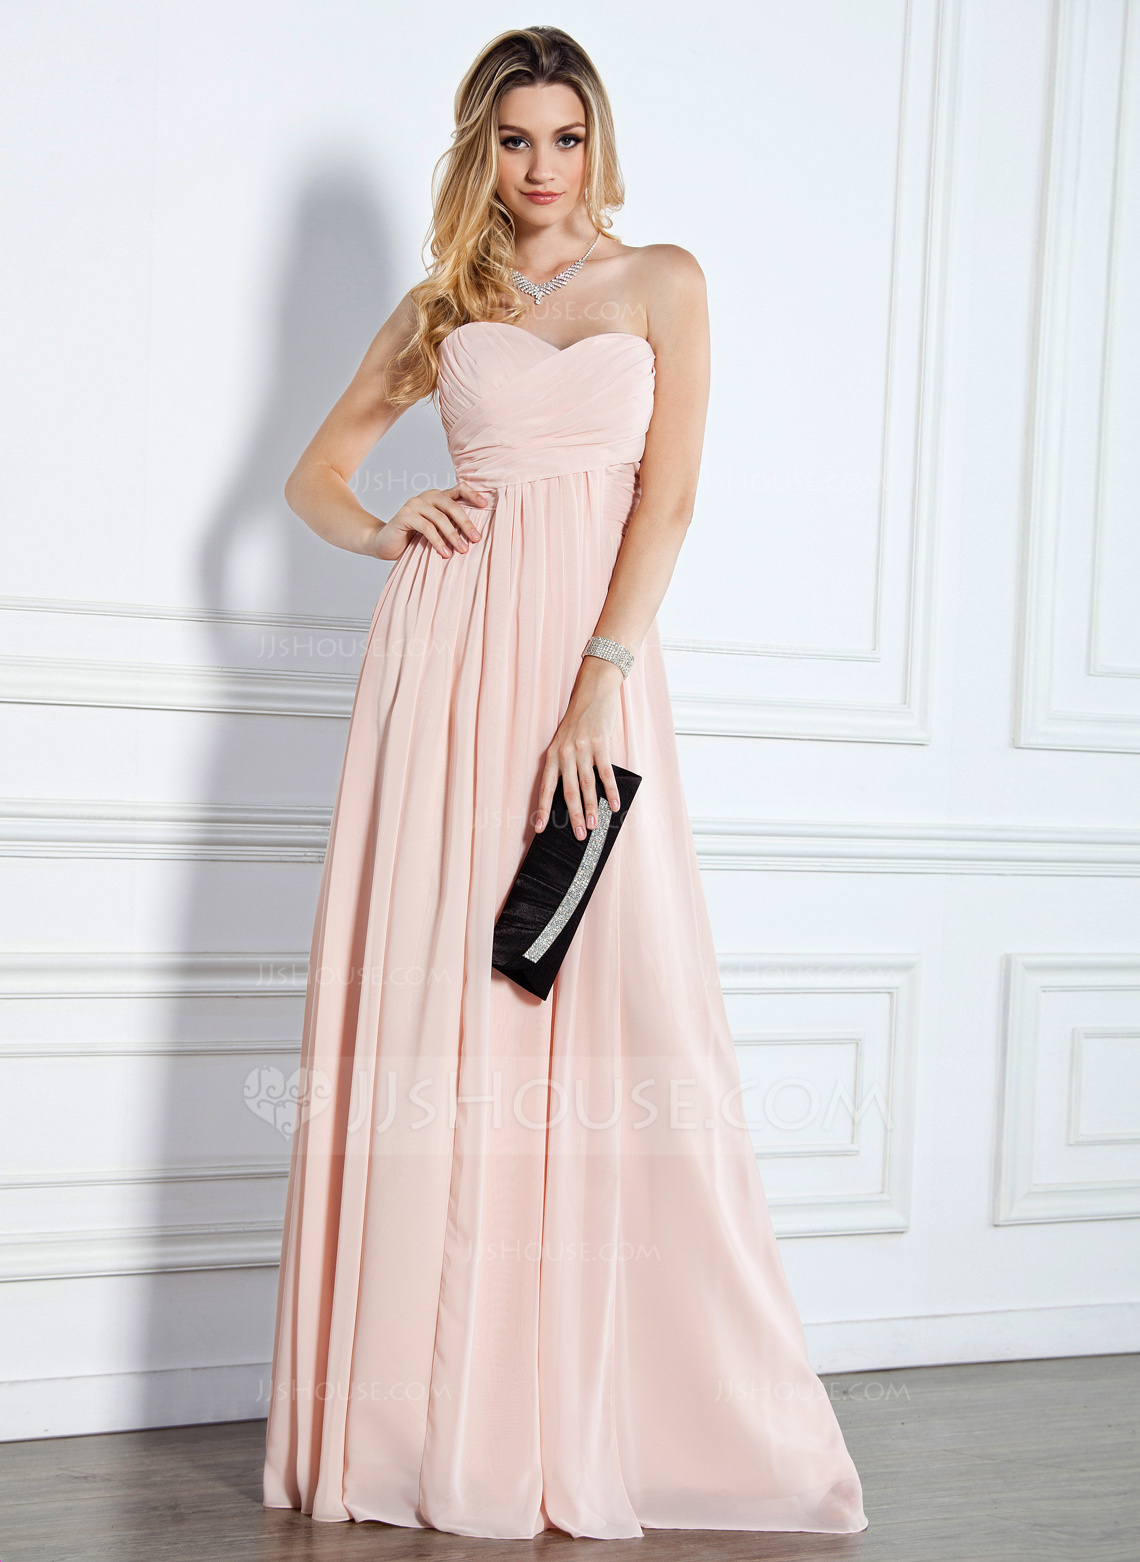 Knee length evening dresses from classic to extravagant